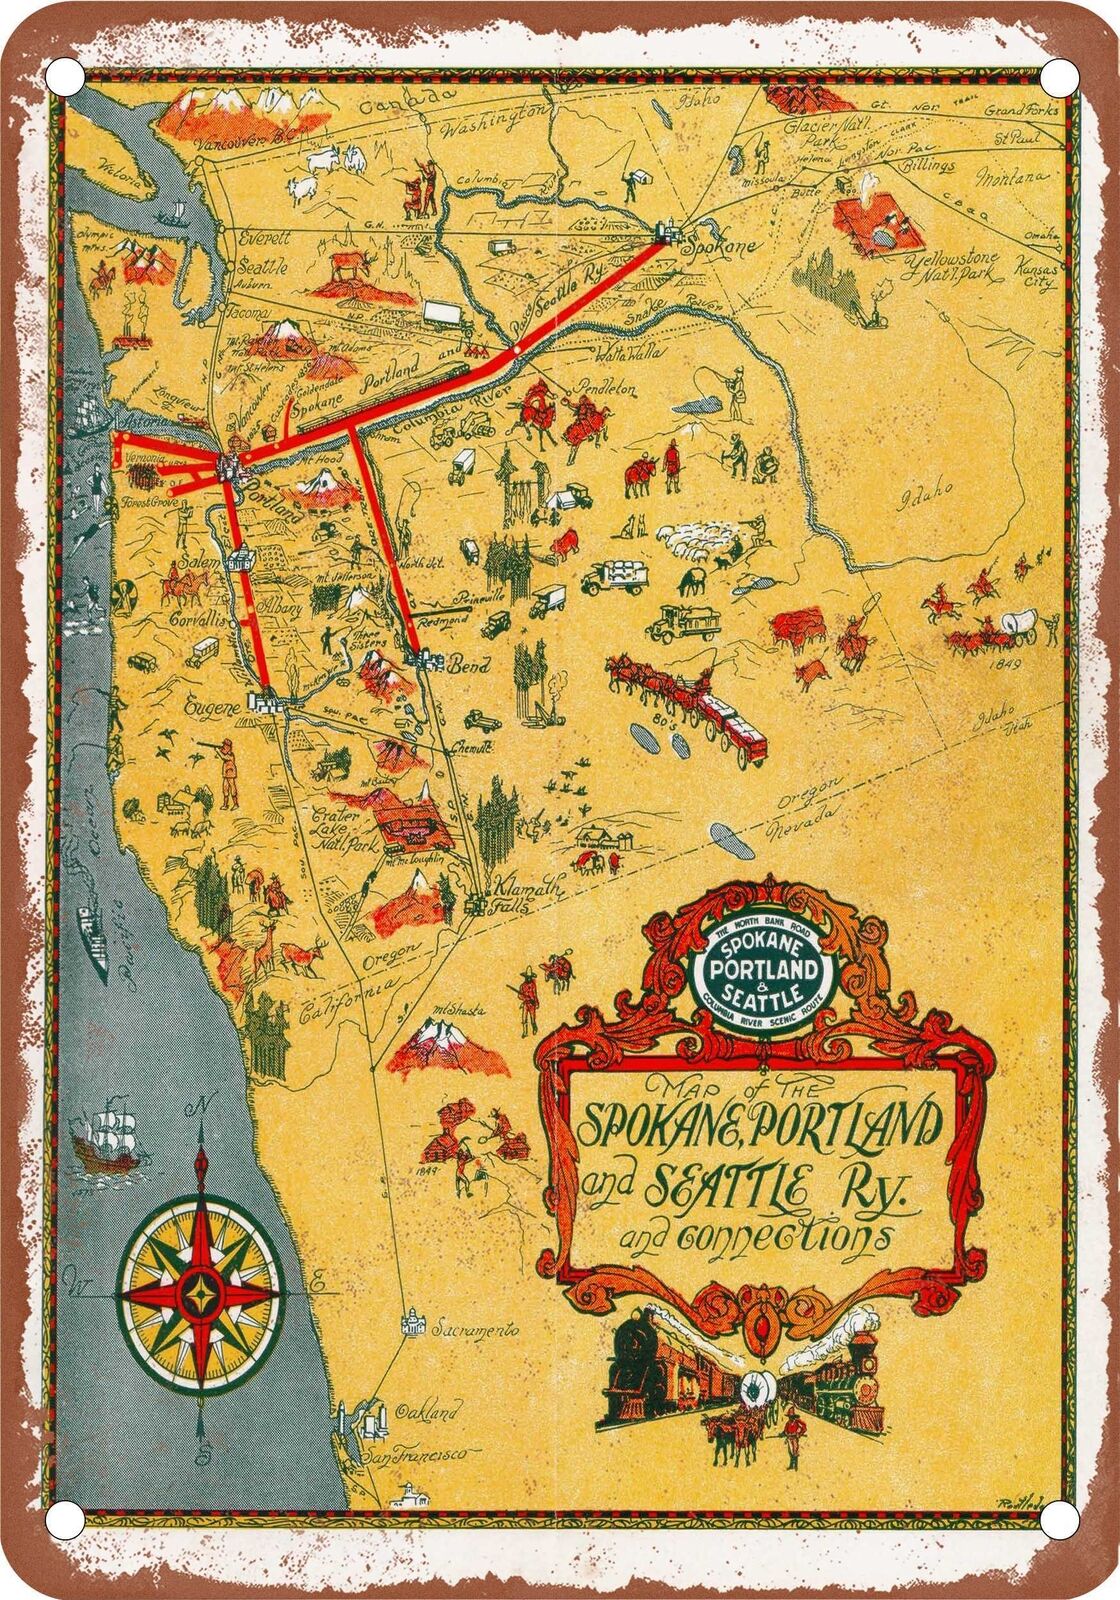 METAL SIGN - 1932 SP&S Route Map and Connections - Vintage Rusty Look